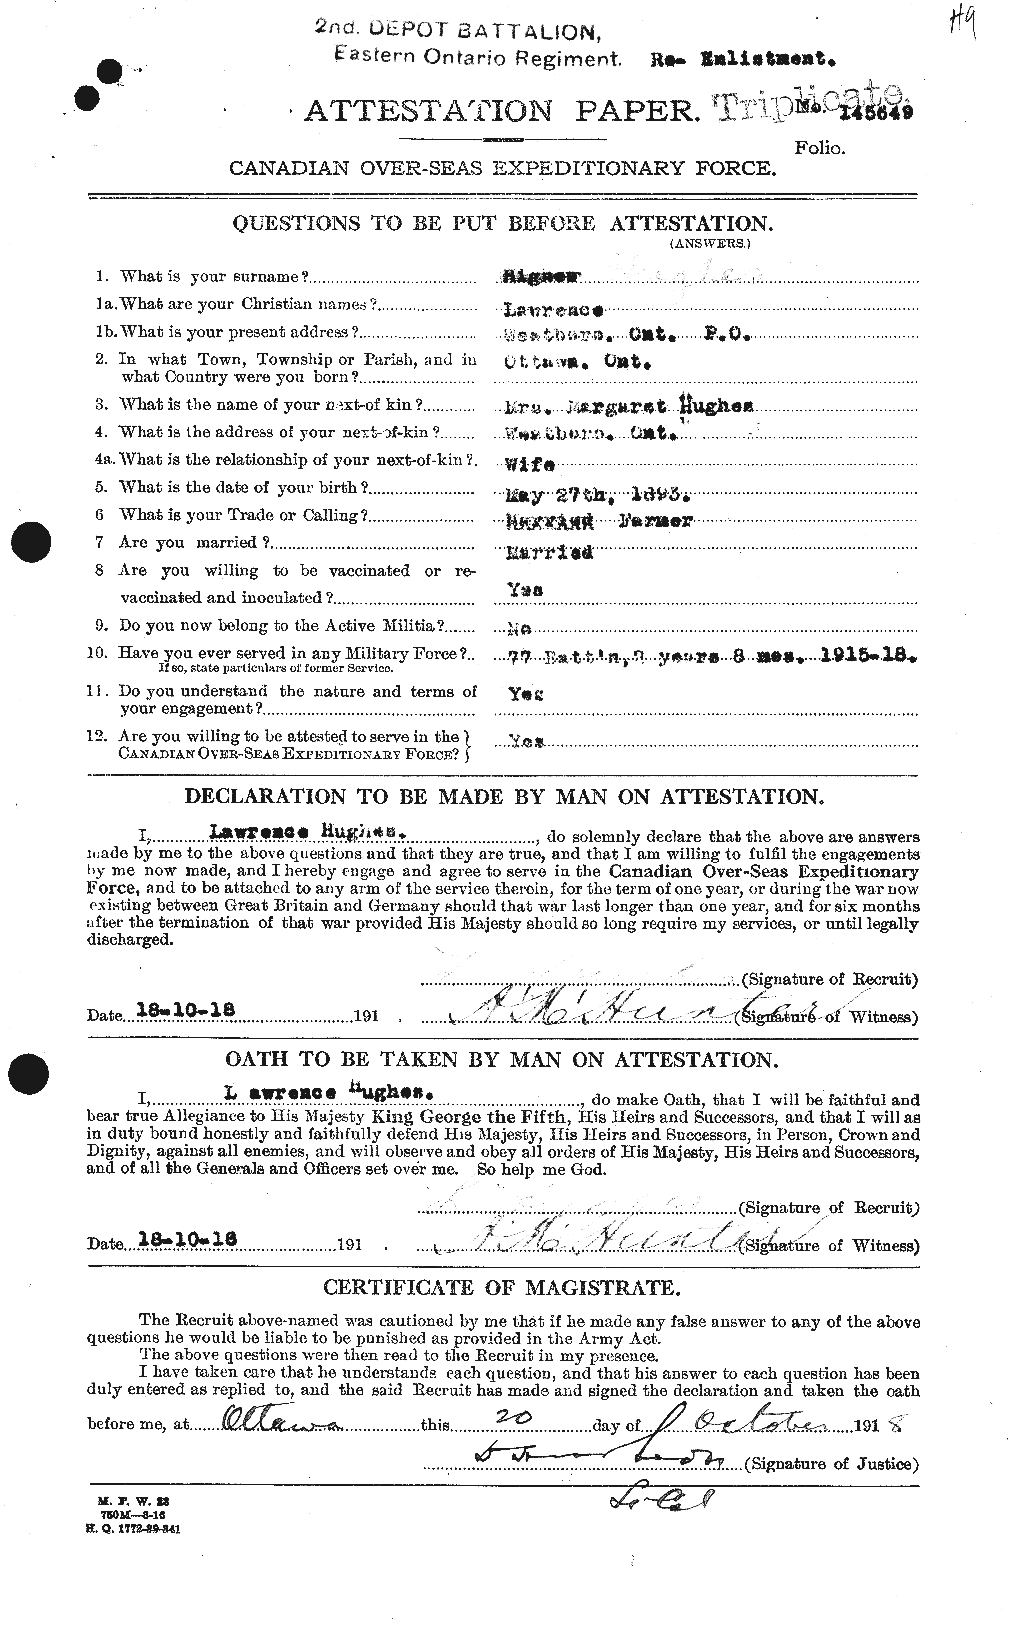 Personnel Records of the First World War - CEF 404096a